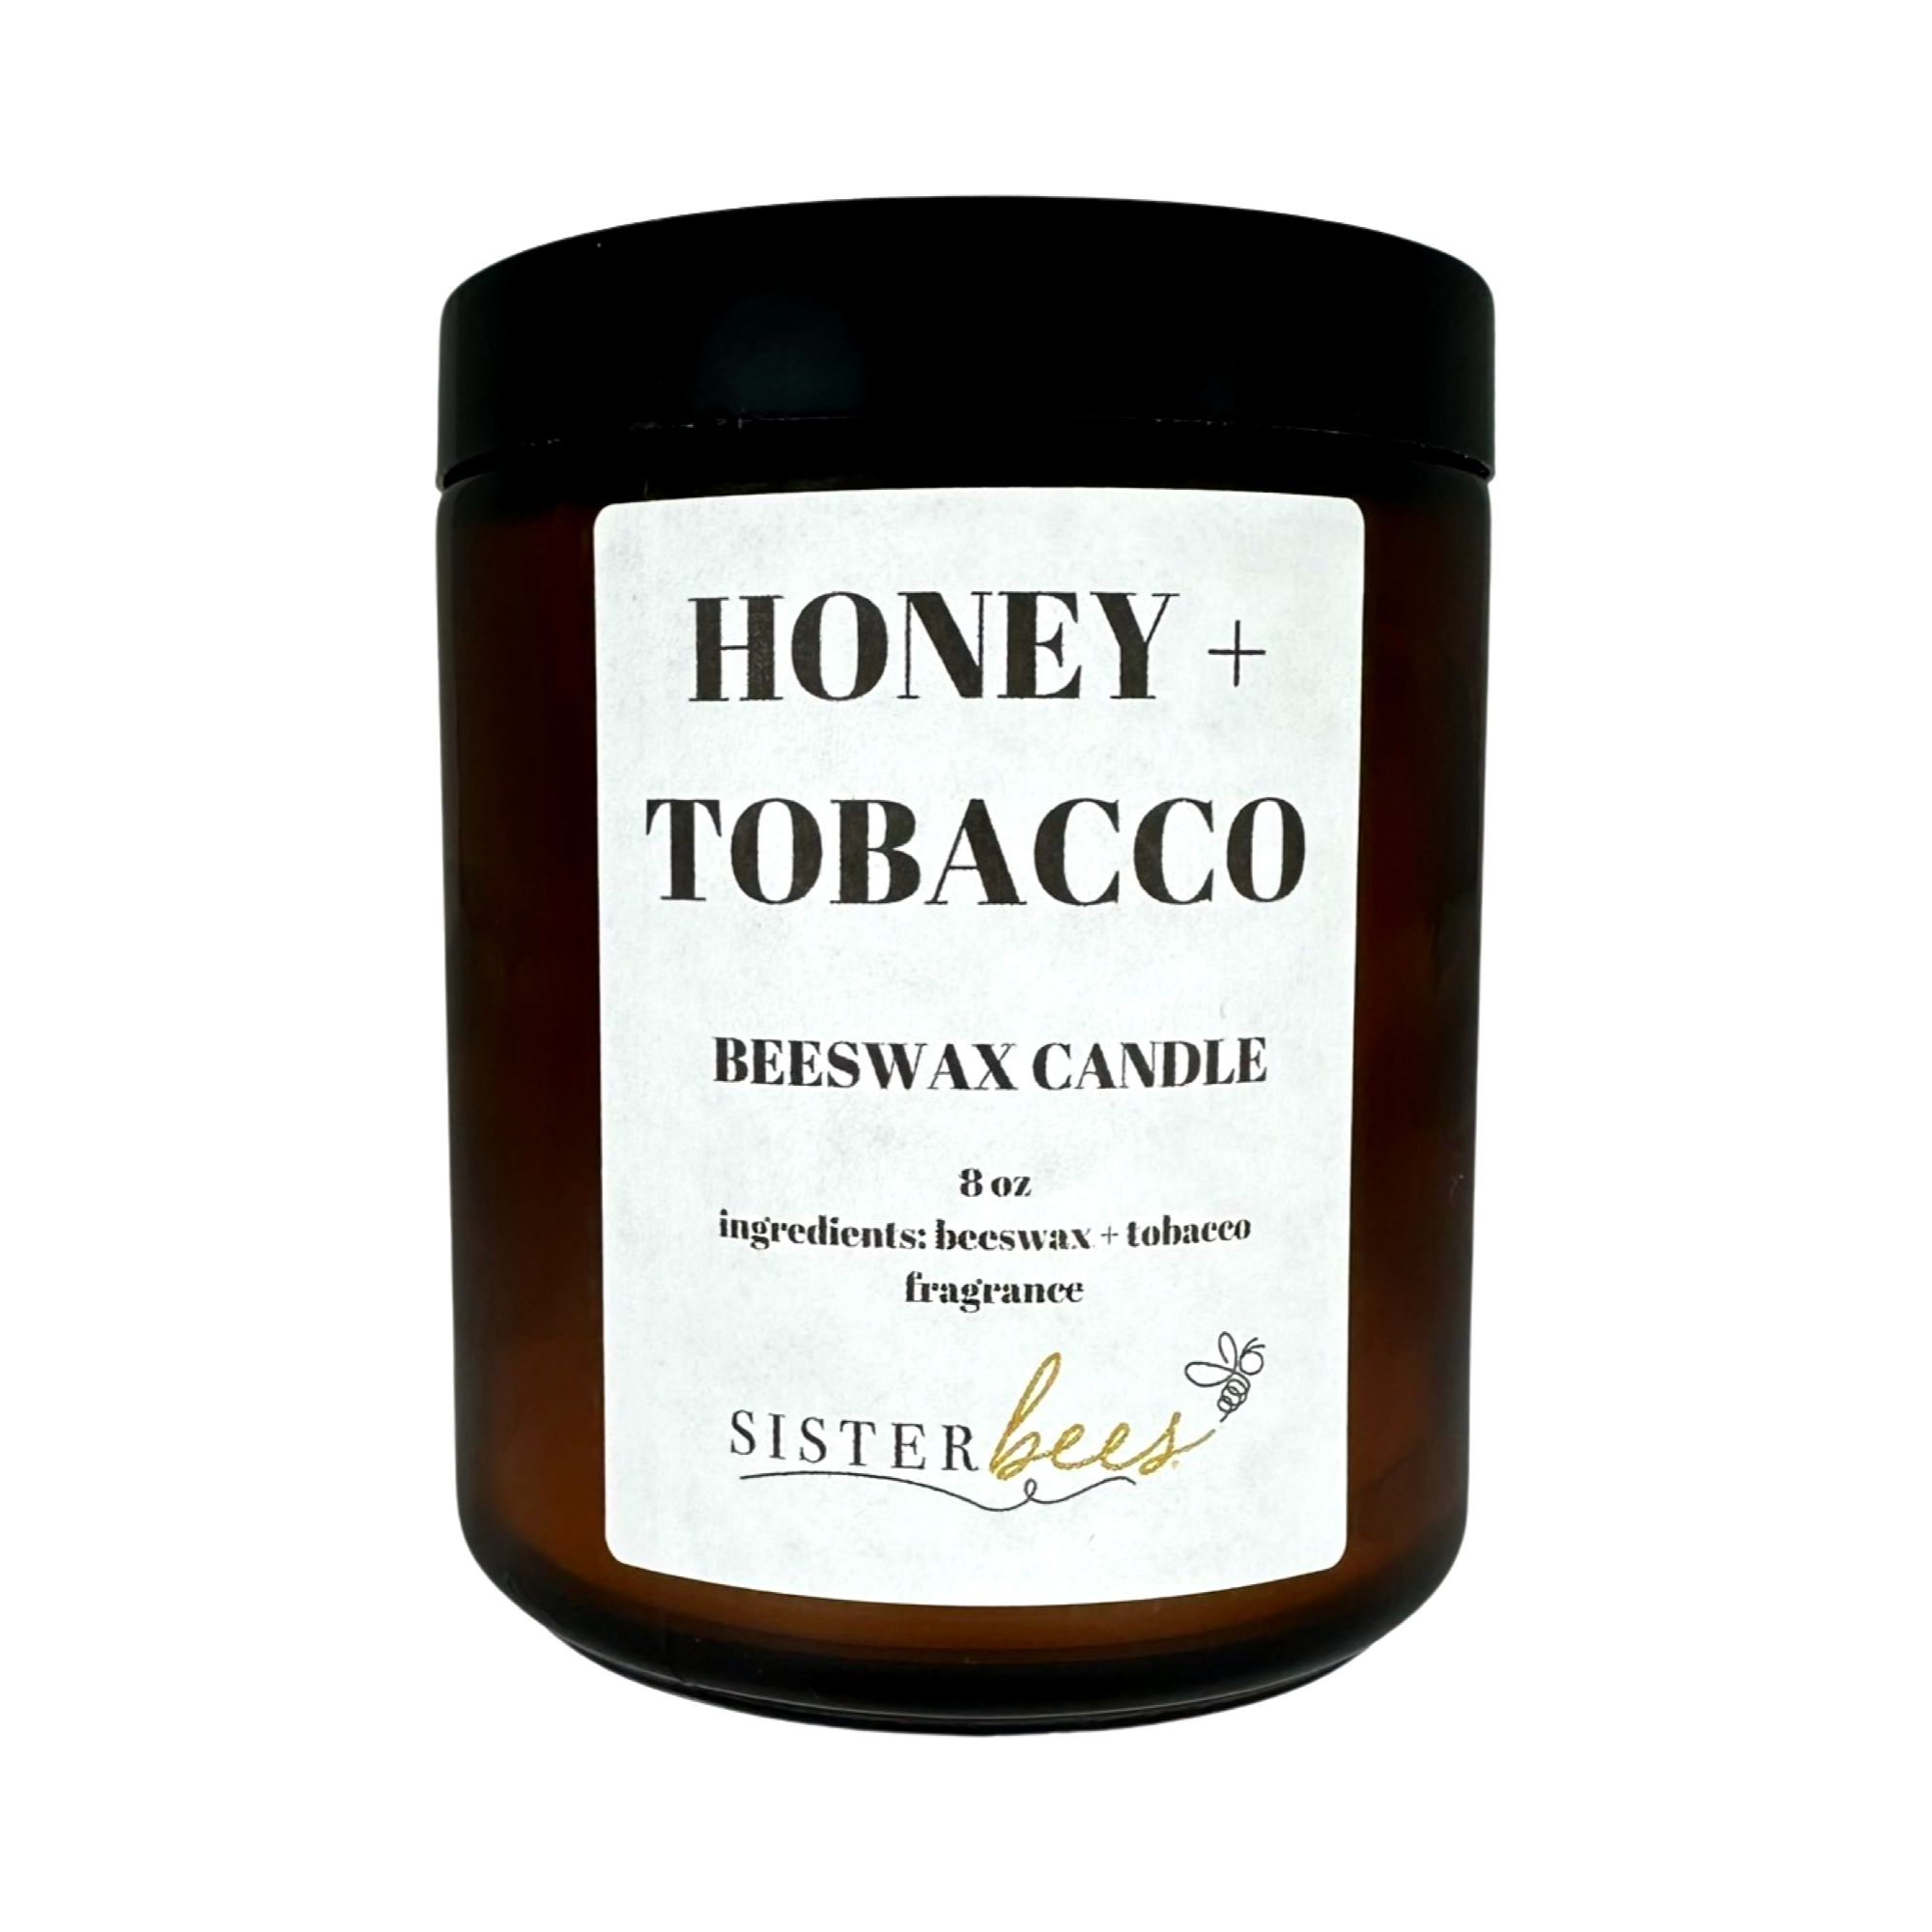 Beeswax Candle - Honey + Tobacco